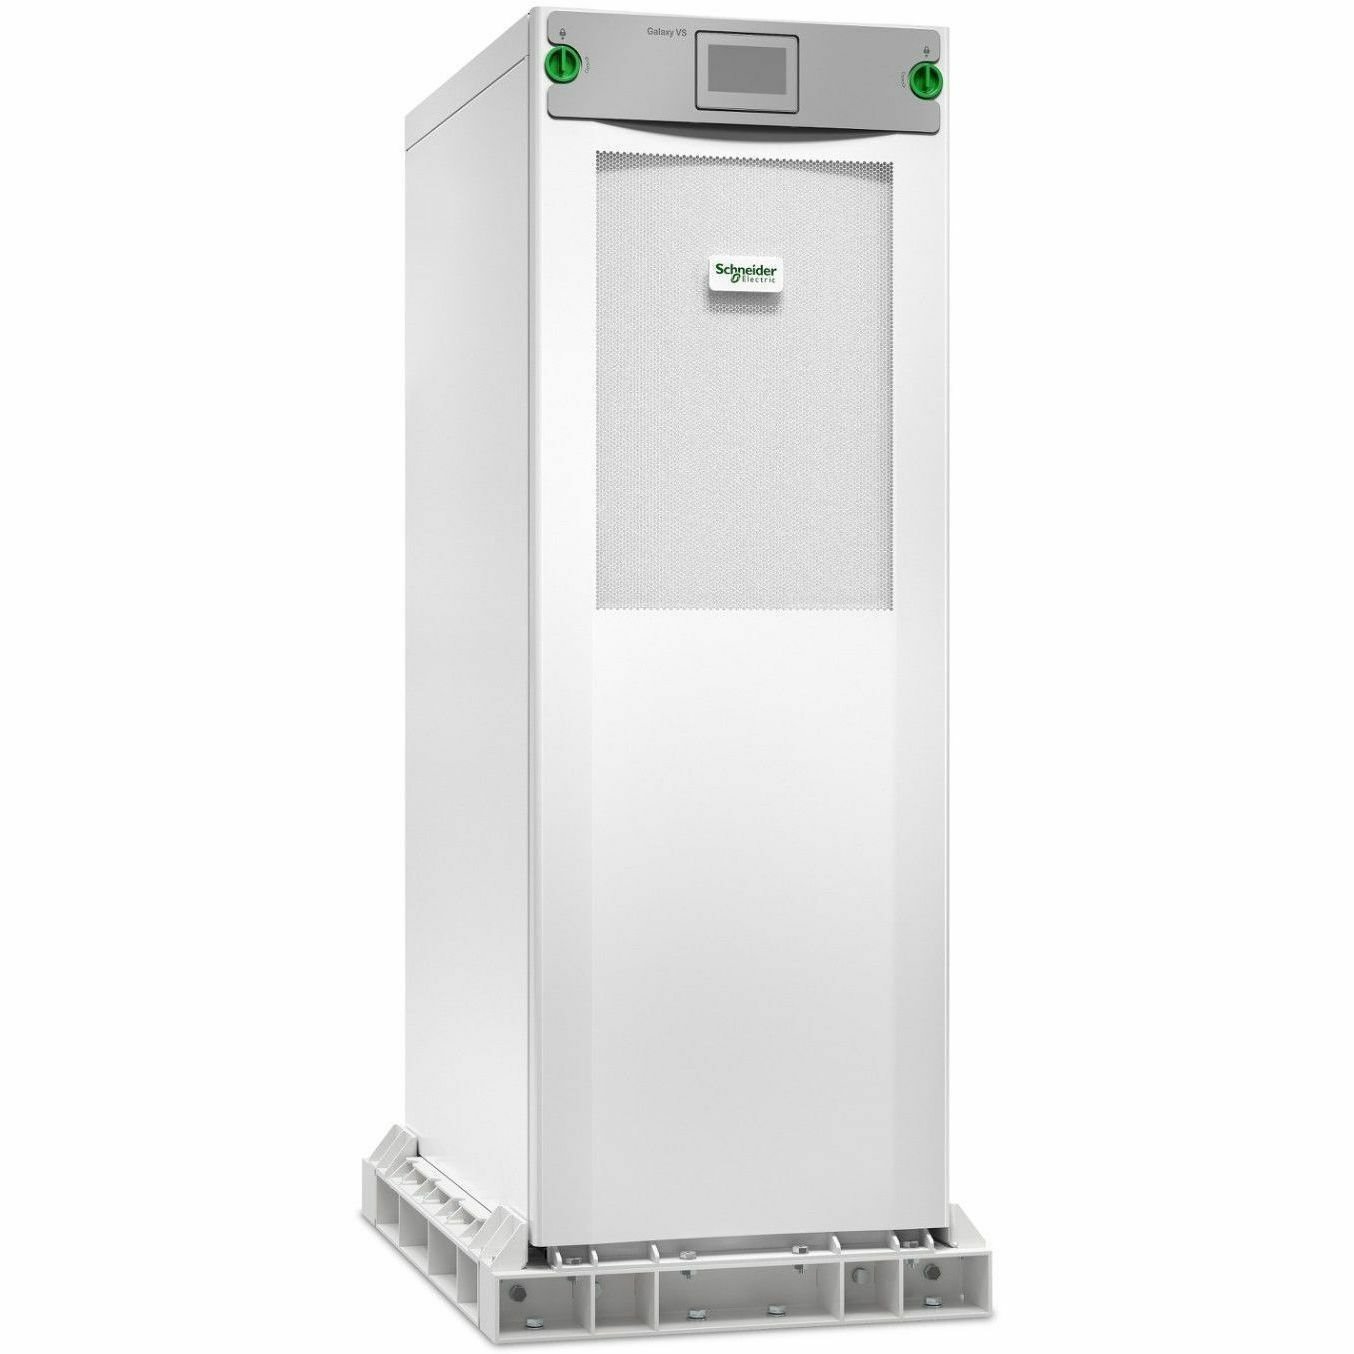 APC by Schneider Electric Galaxy VS Double Conversion Online UPS - 150 kVA/150 kW - Three Phase